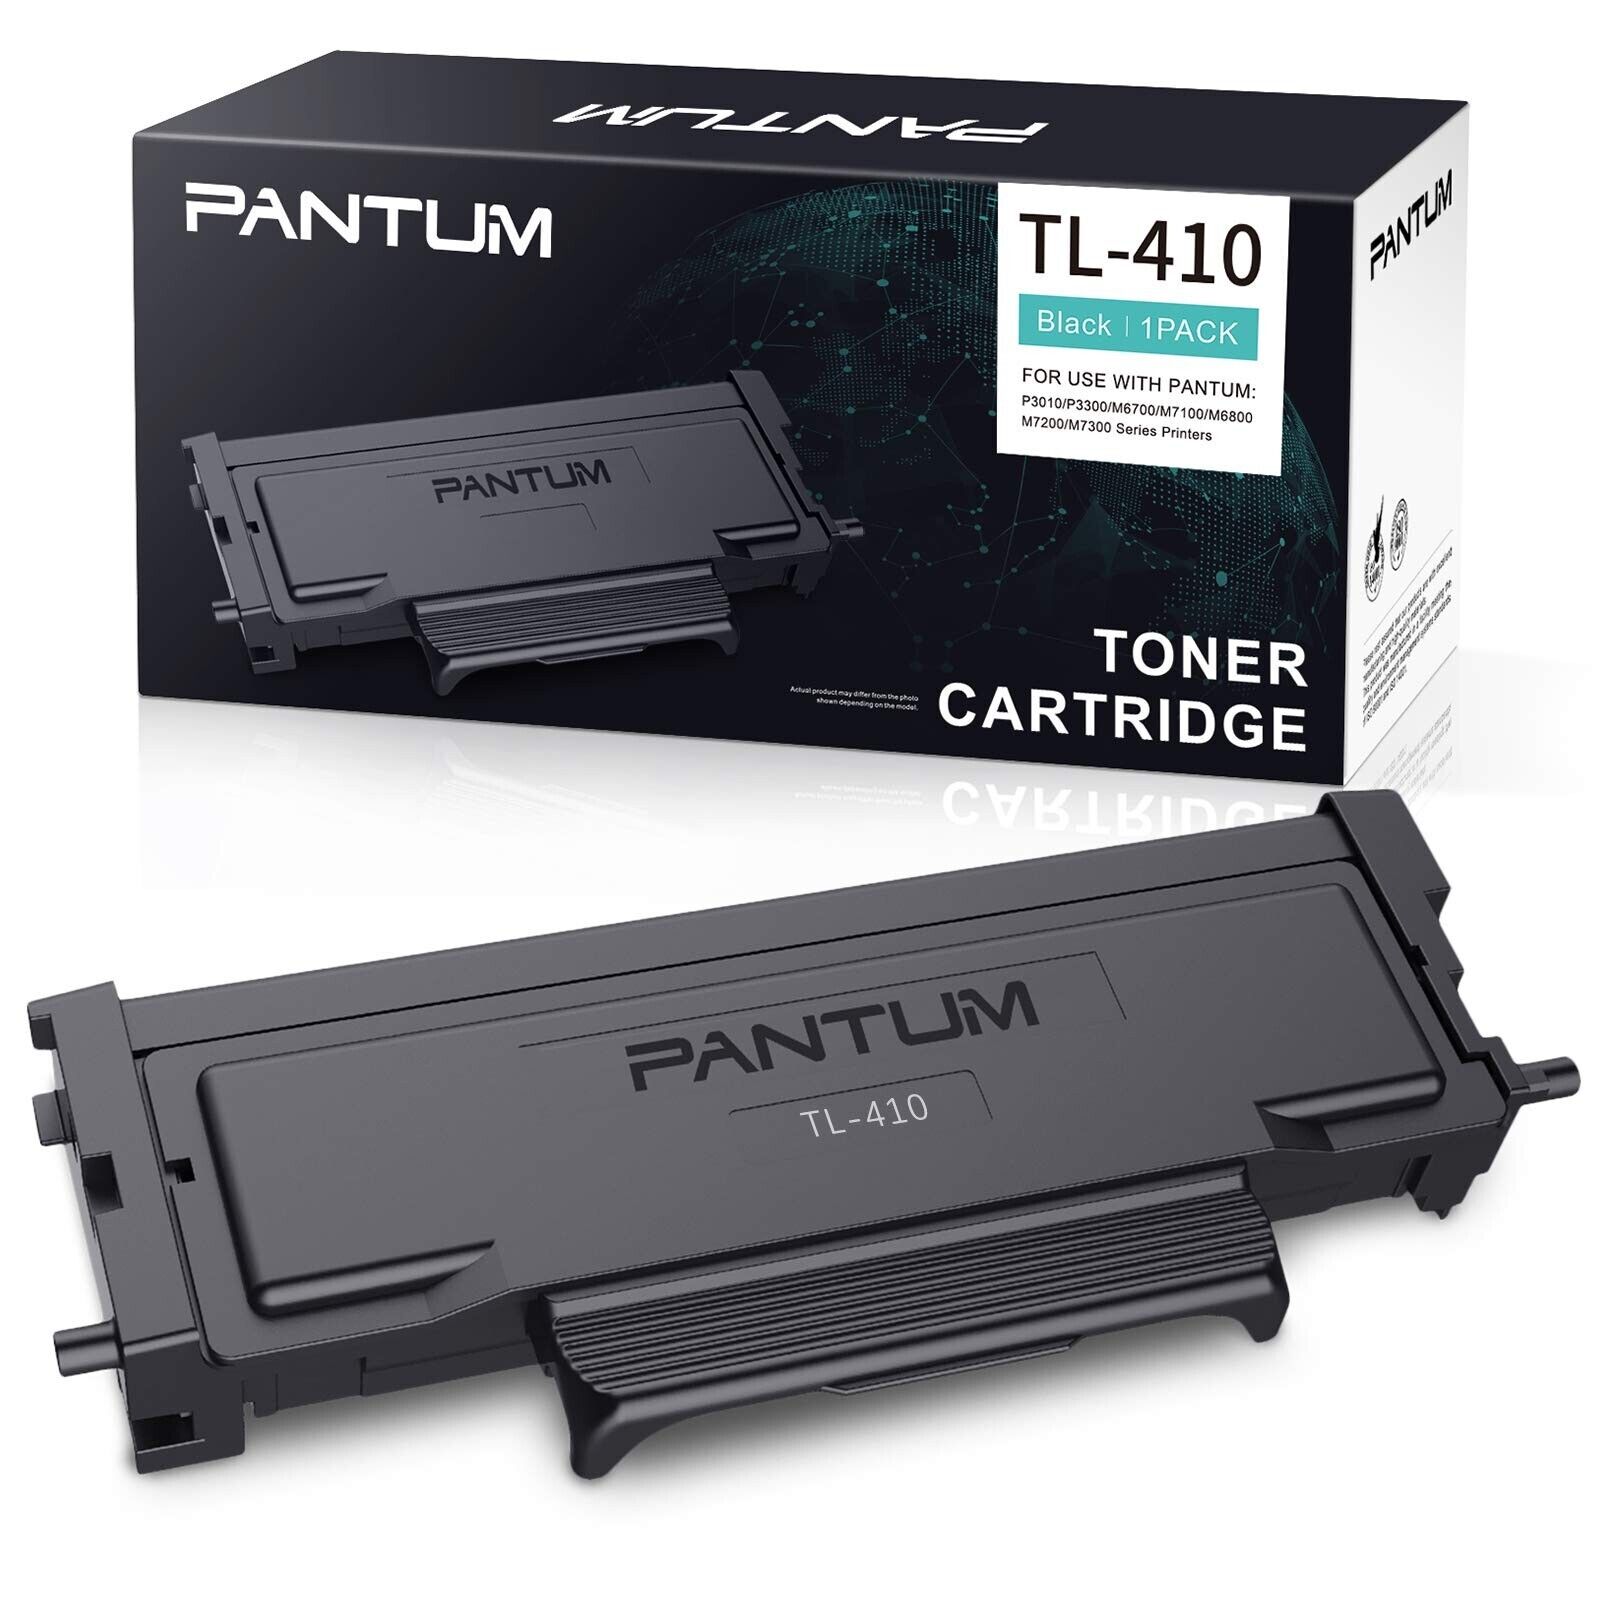 Pantum TL-410 Black Toner Cartridge Work with DL-410 Series, Compatible with ...